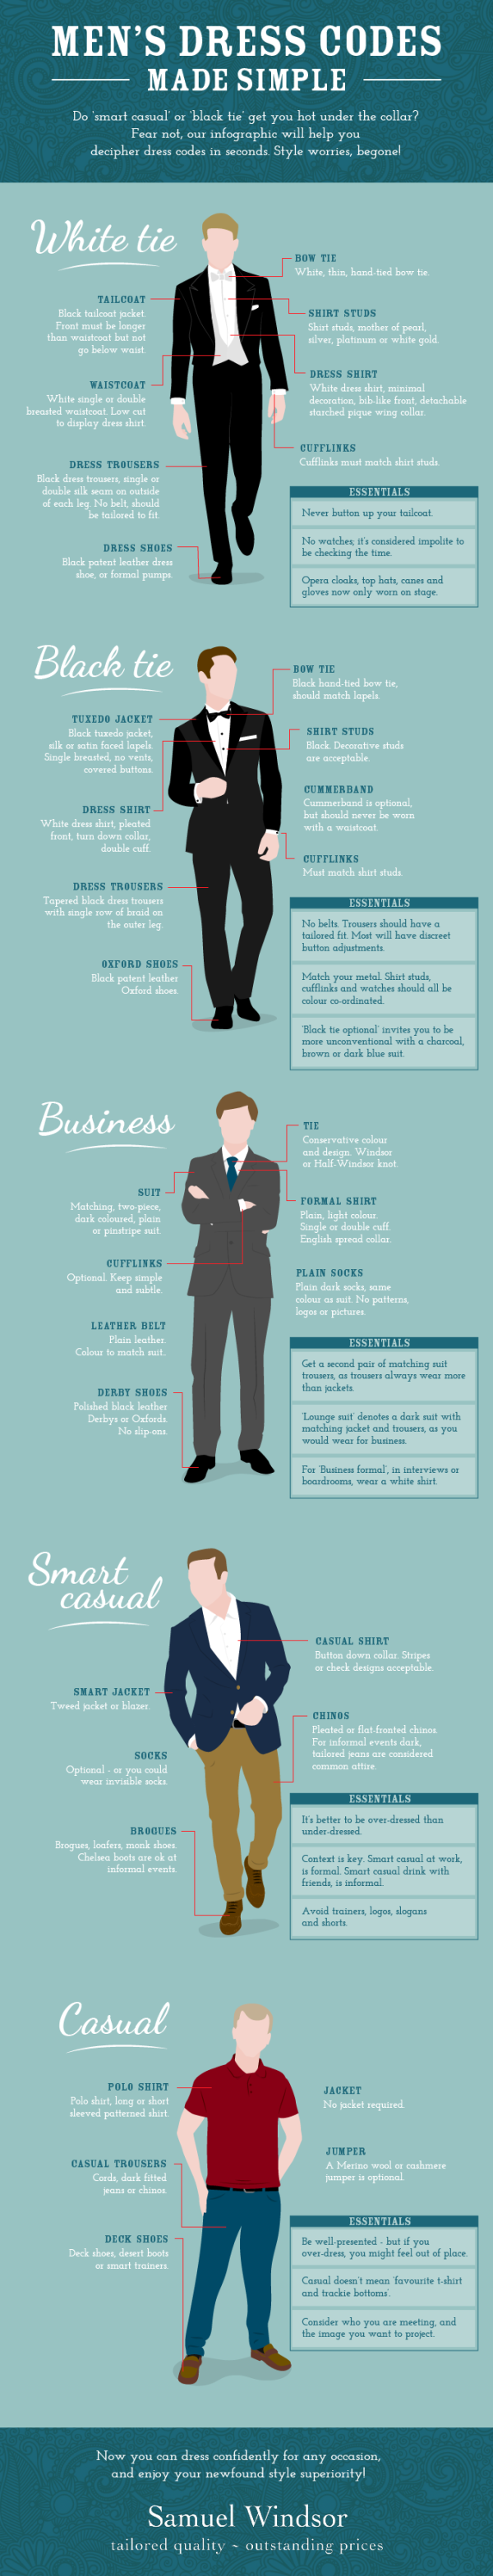 Men's Dress Codes Made Simple — Cool Infographics